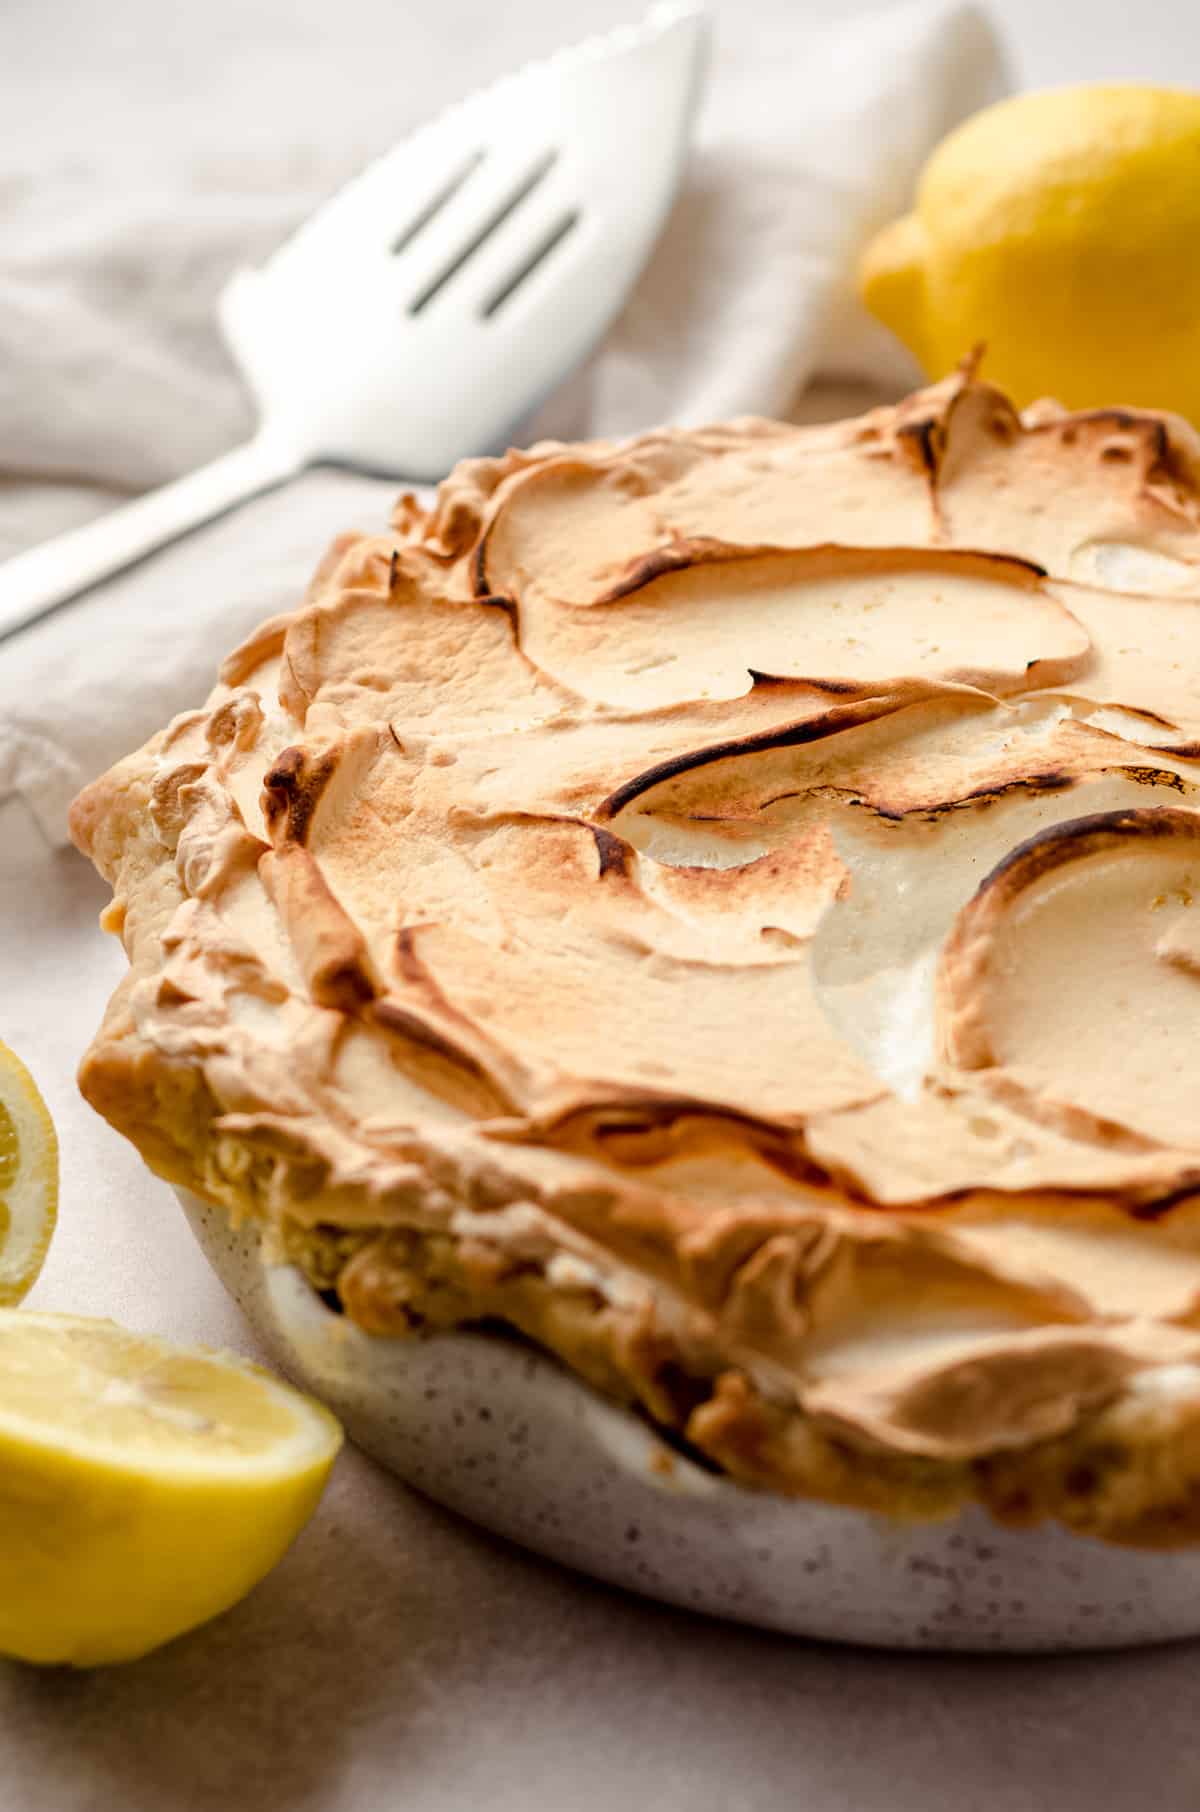 A baked lemon meringue pie, with browned meringue and lemons in the background.